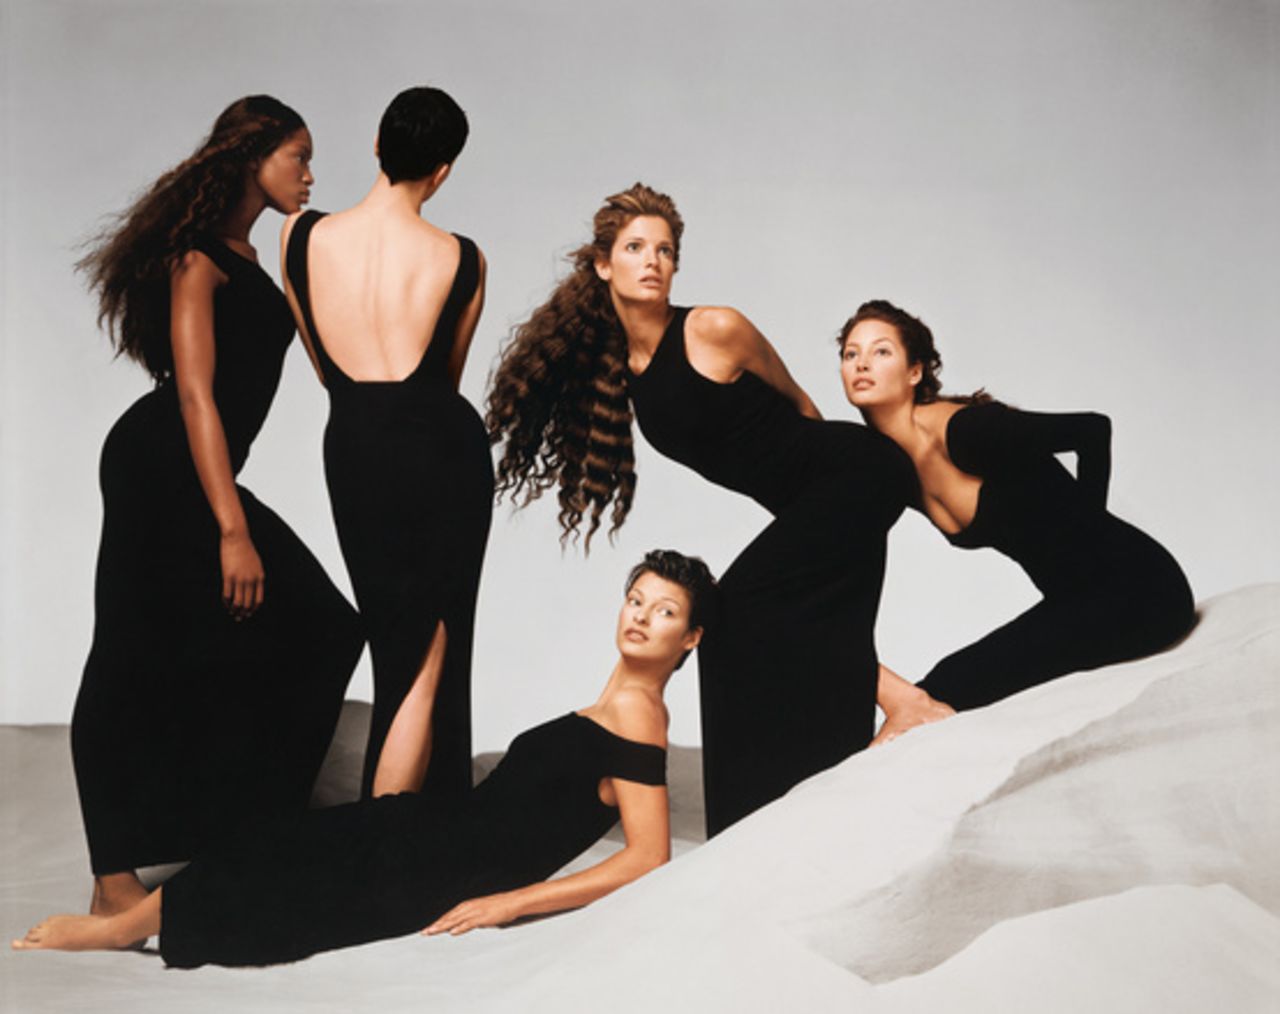 Showcasing some of the most famous fashion faces of the '90s, this Versace advertisement by Richard Avedon featured the likes of Naomi Campbell, Kristen McMenamy, Linda Evangelista, Stephanie Seymour, and Christy Turlington. The image is <a href="http://www.vogue.co.uk/suzy-menkes/2014/11/suzy-menkes-avedon-gagosian-versace" target="_blank" target="_blank">said</a> to have captured the epitome of the "power-woman era" which celebrated "feminist energy" and androgyny. 